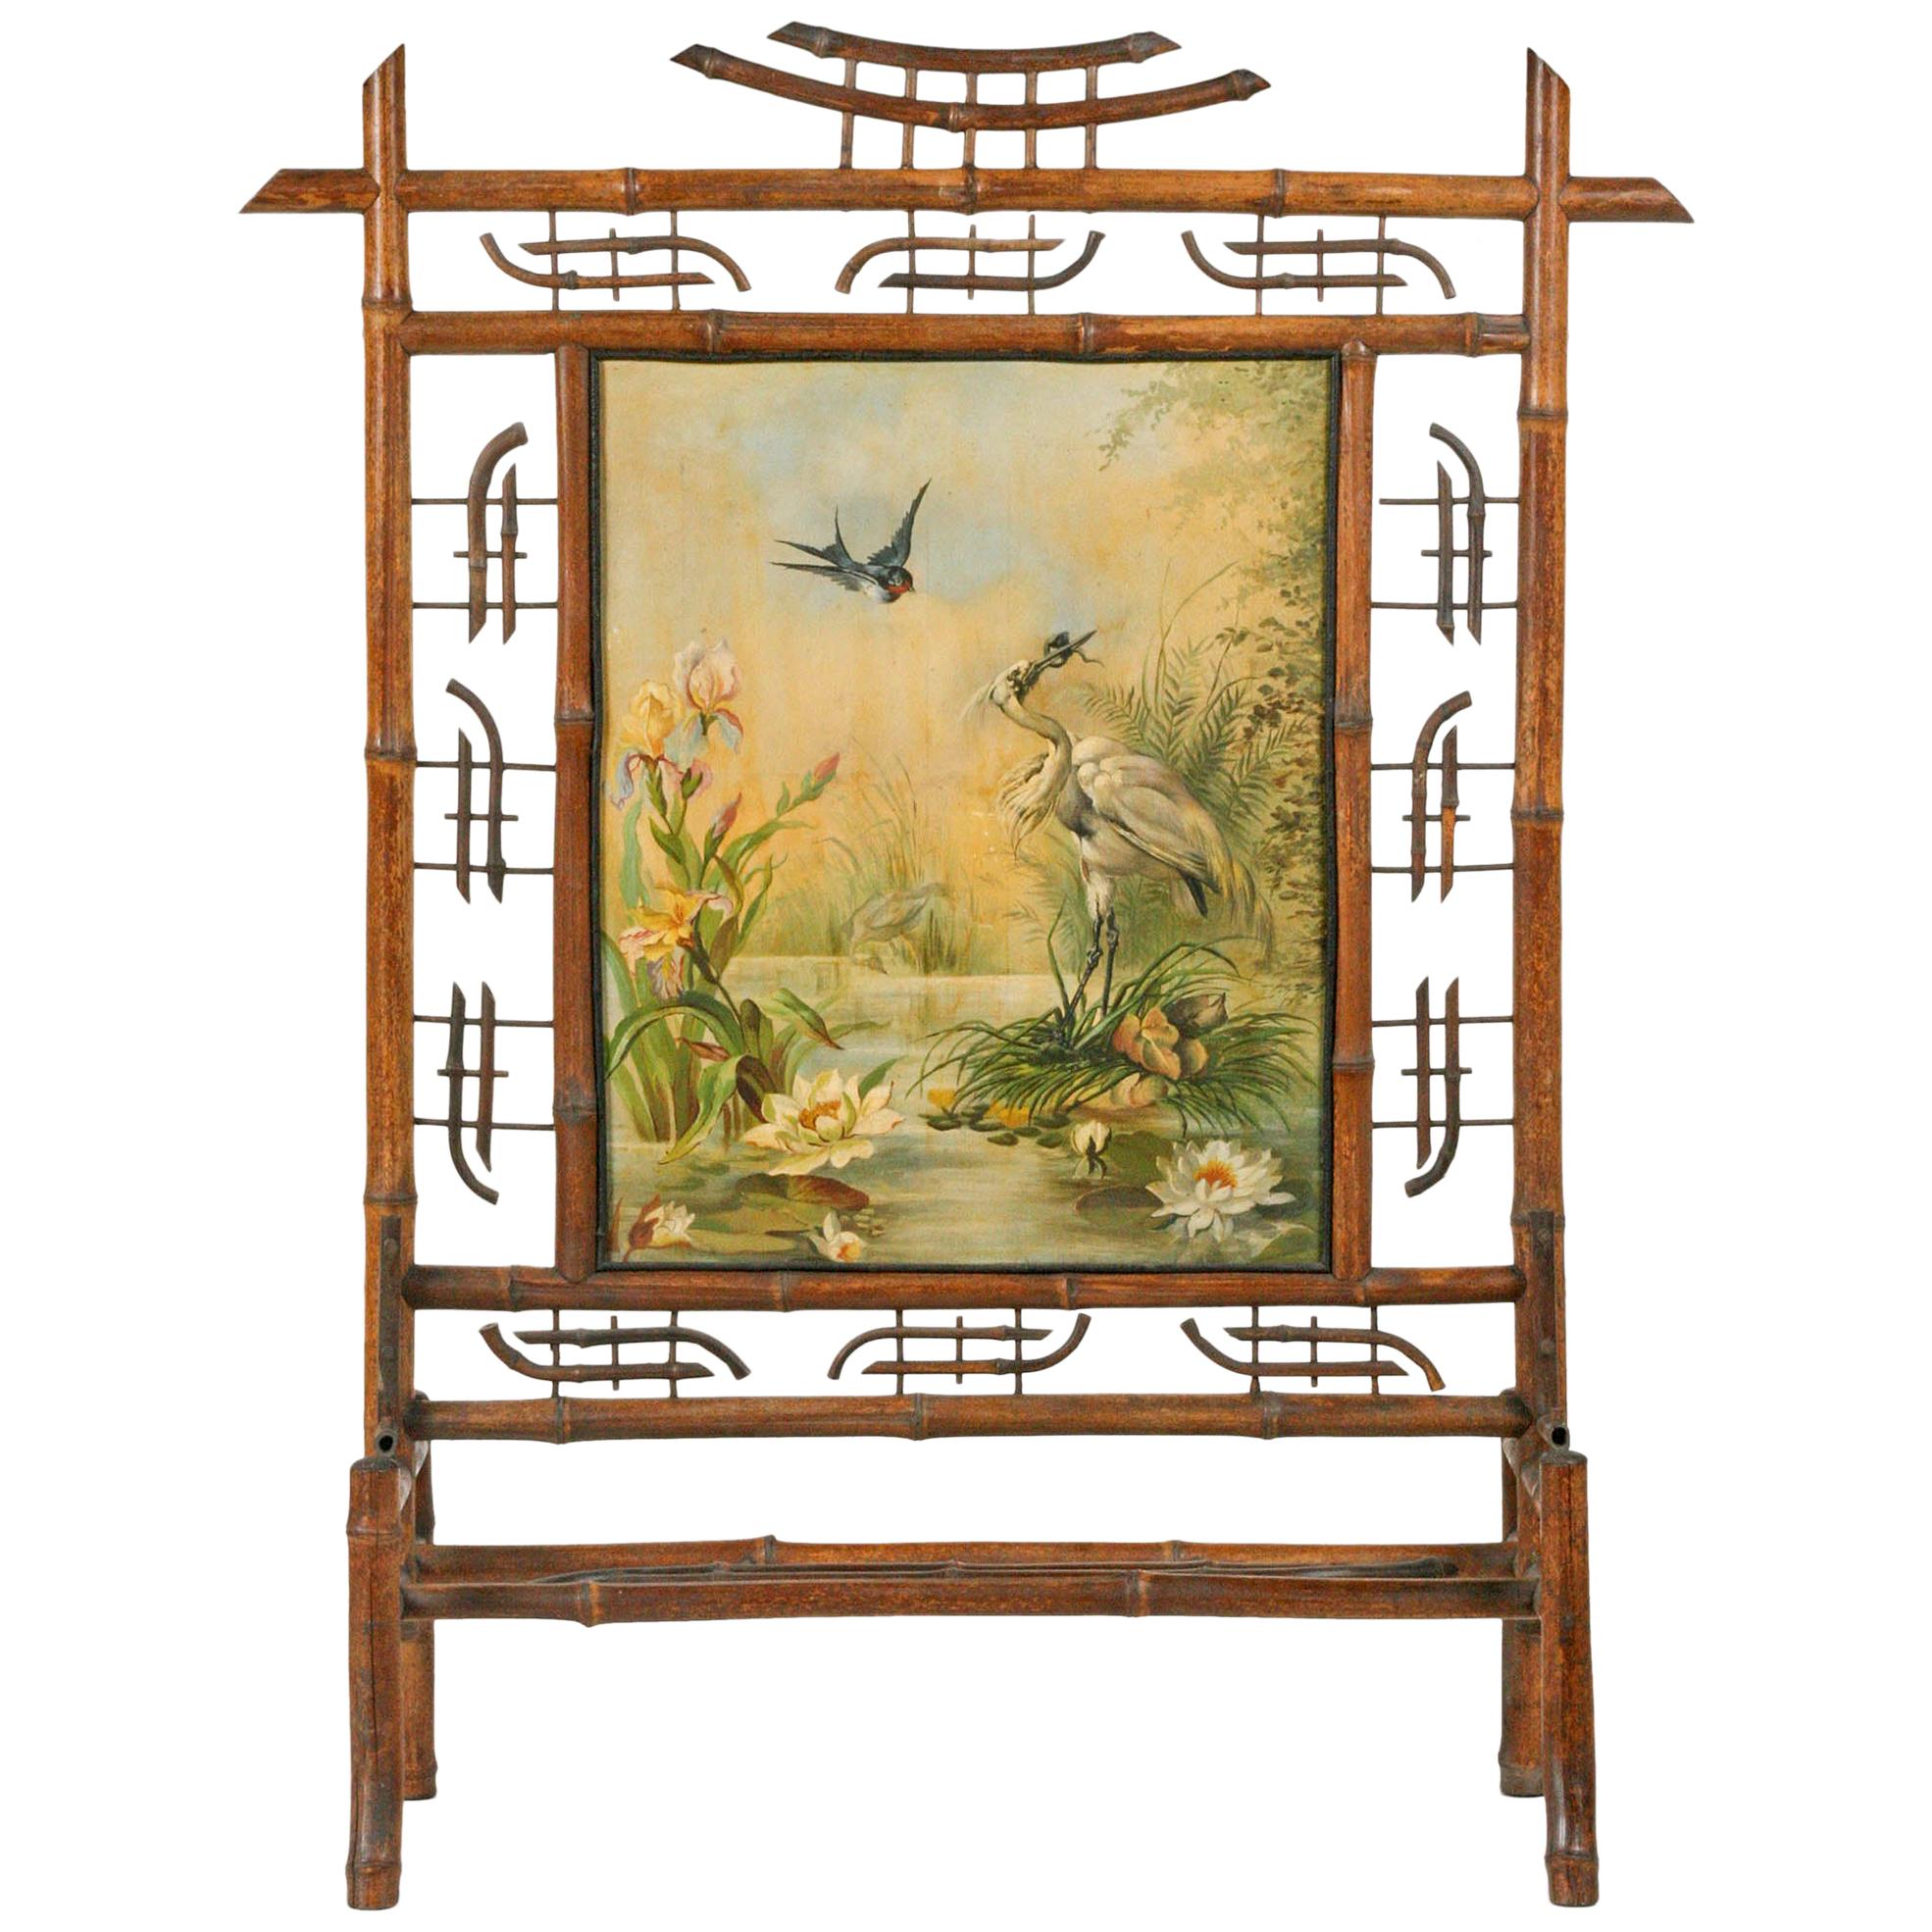 Art Nouveau Fireplace Screen, Made of Bamboo, with Painting on Canvas from 1896